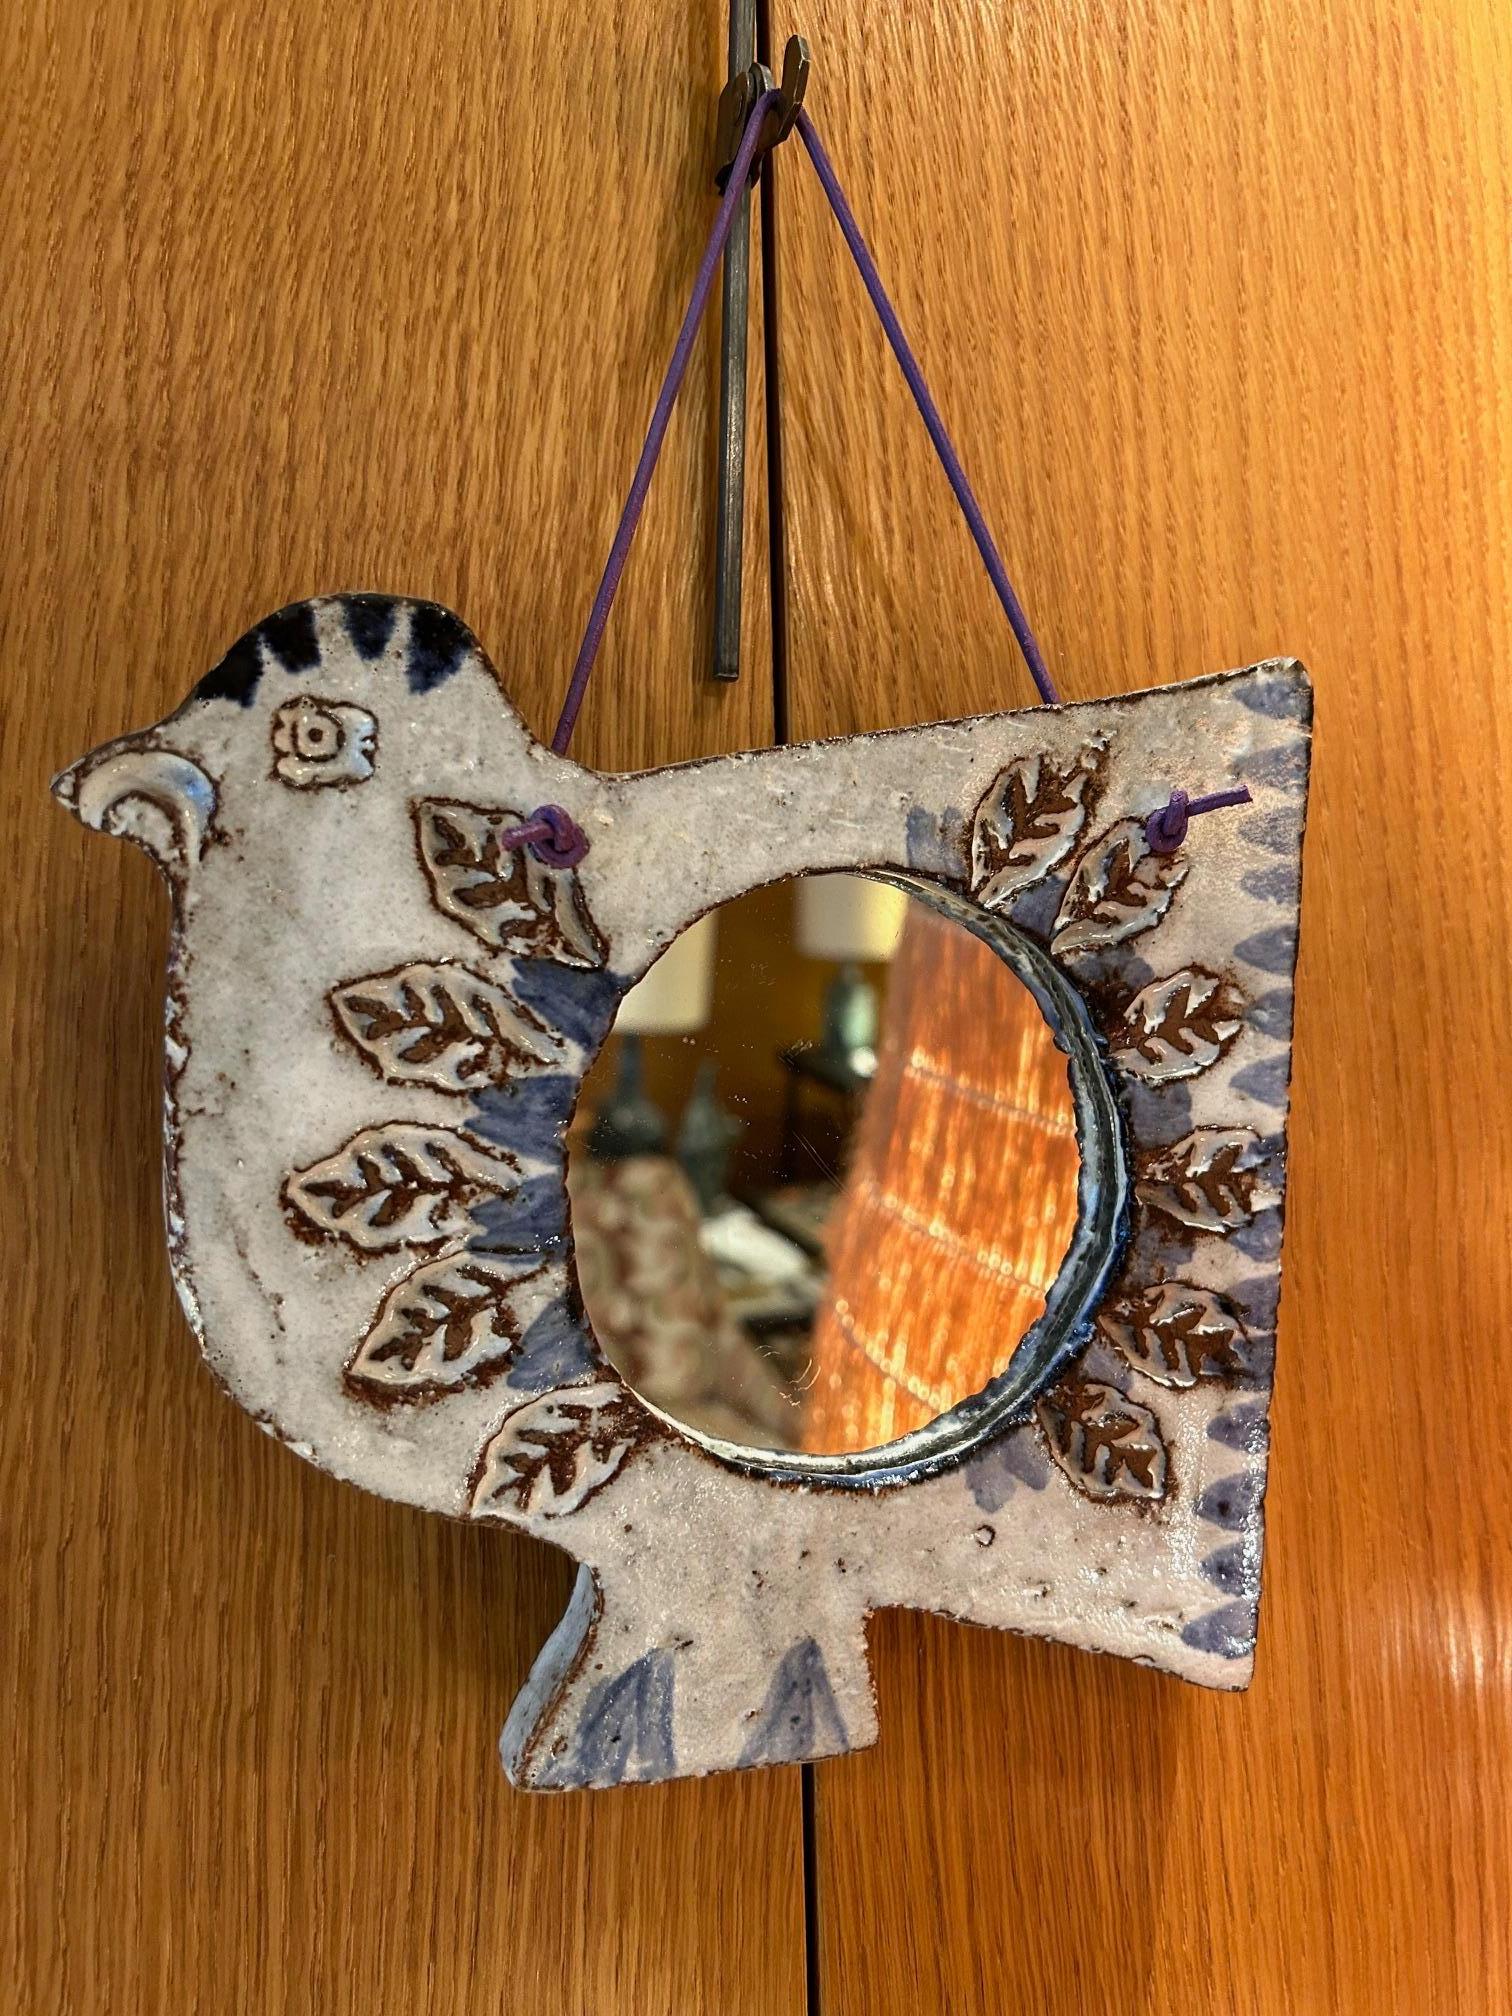 Ceramic bird mirror by Albert Thiry, France, 1960's, leather hang